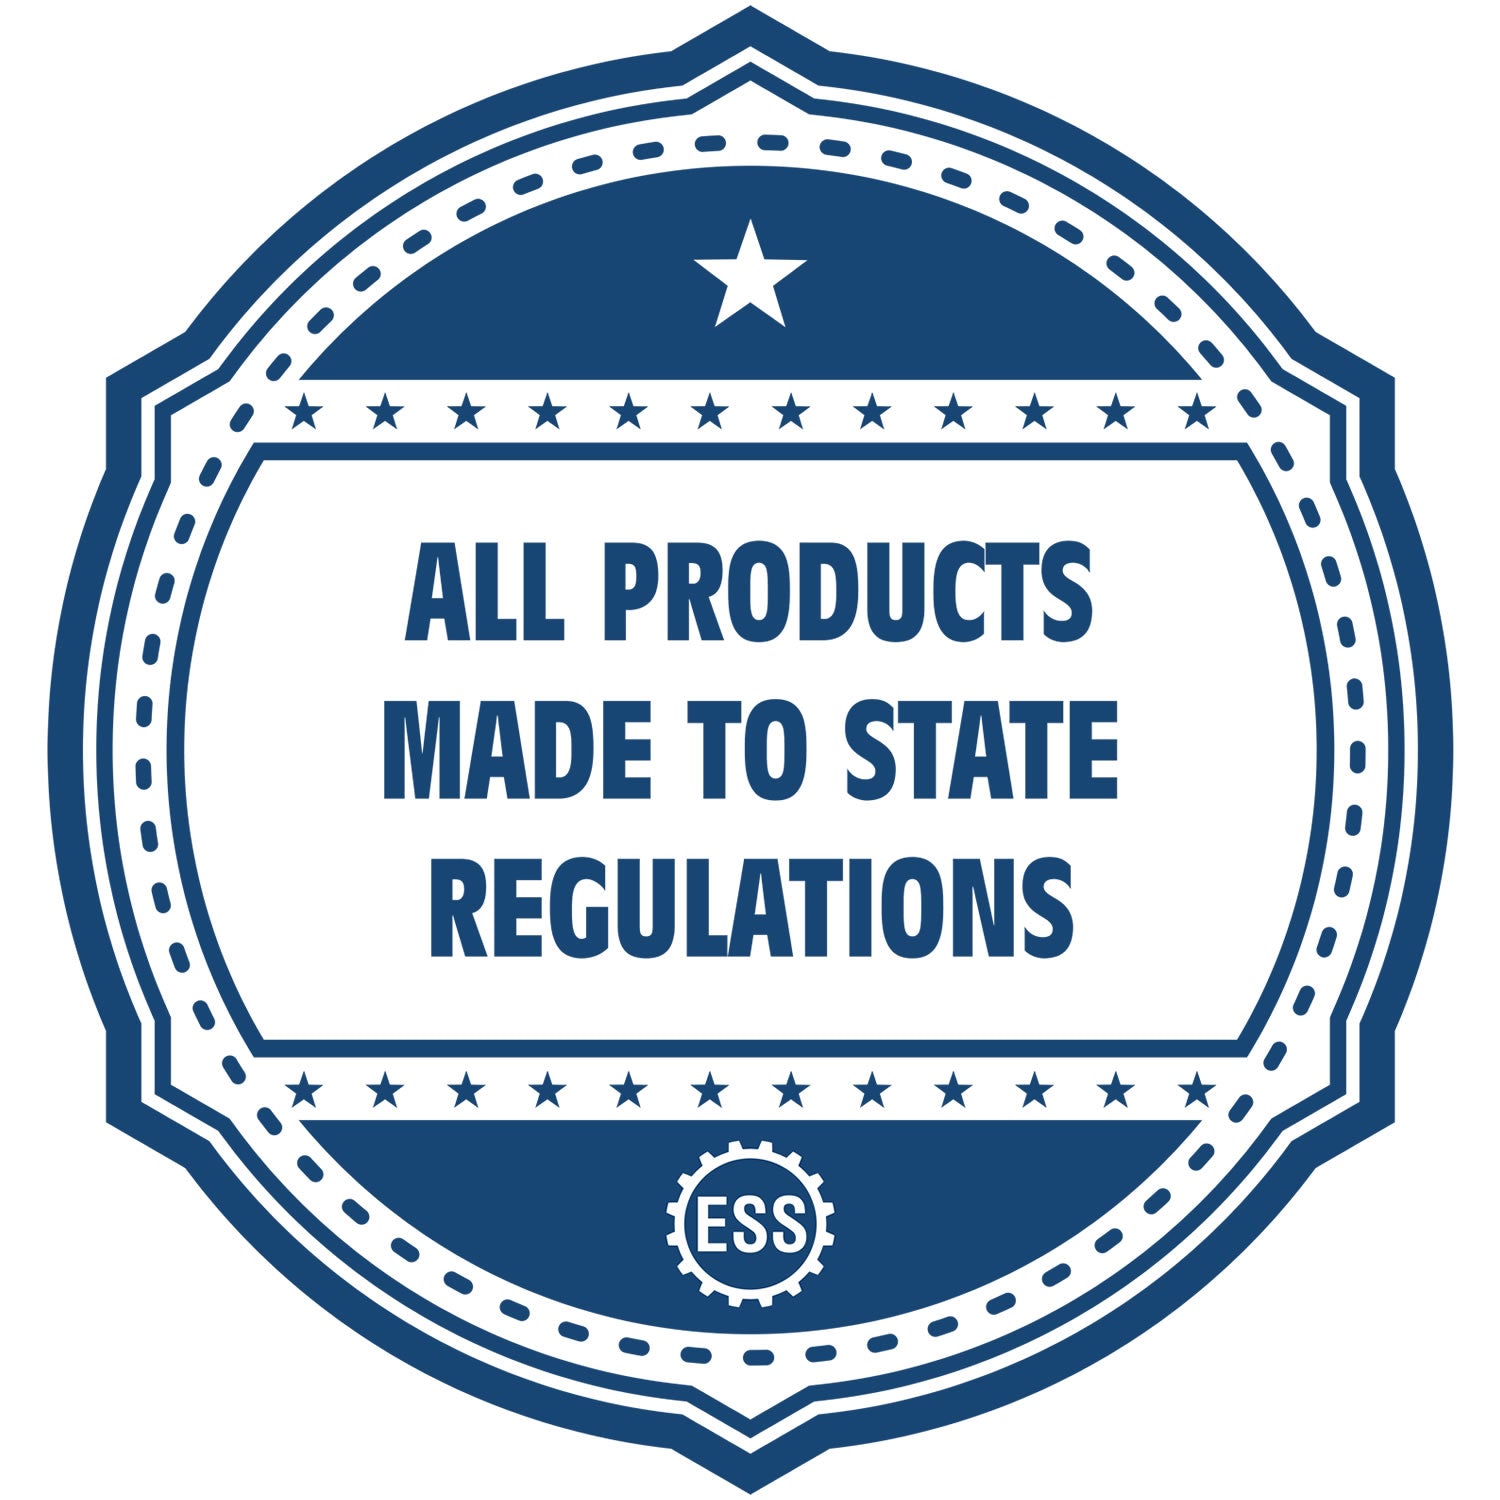 An icon or badge element for the Slim Pre-Inked South Dakota Landscape Architect Seal Stamp showing that this product is made in compliance with state regulations.